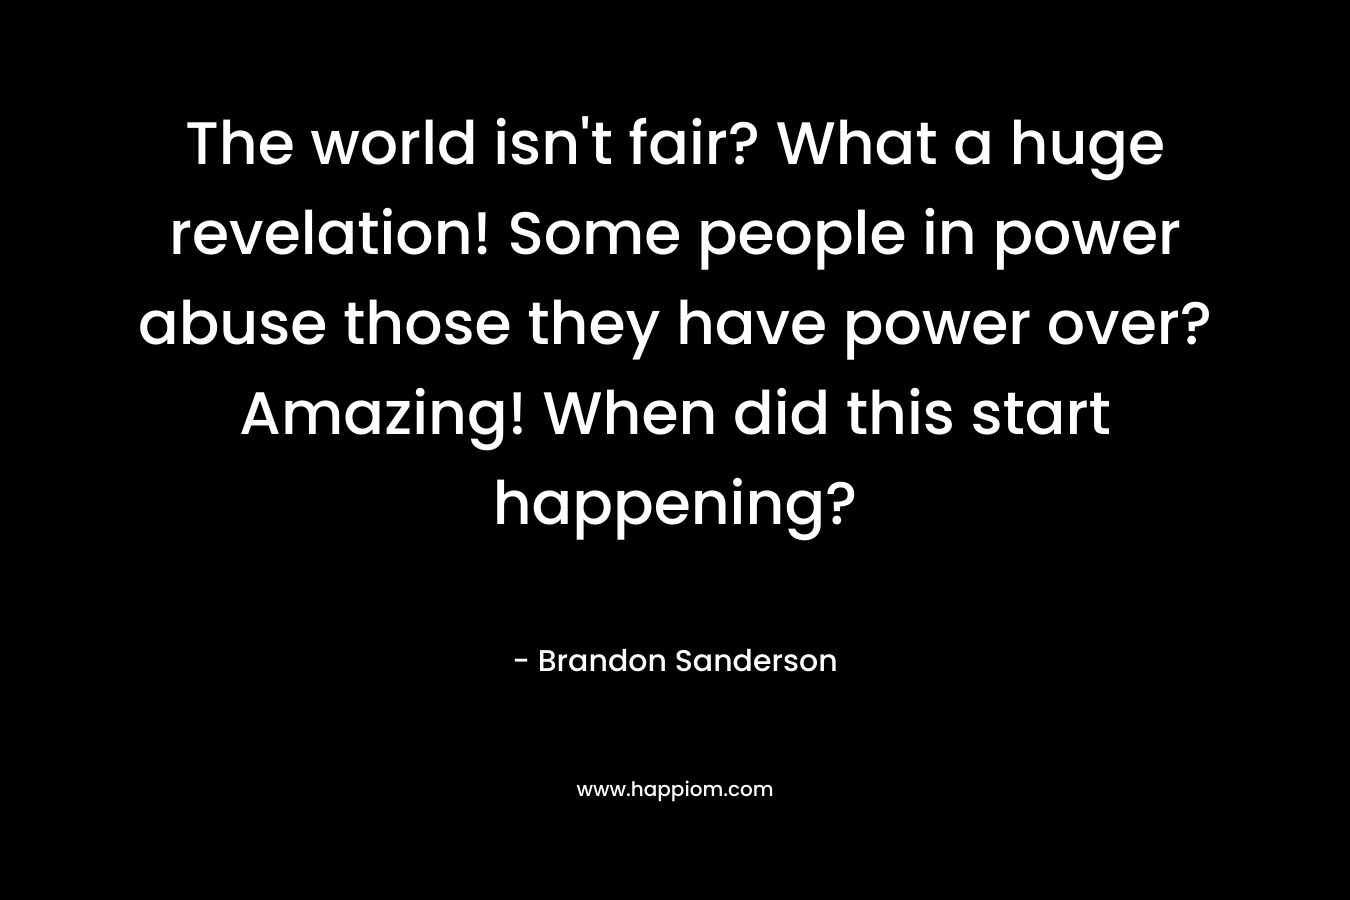 The world isn't fair? What a huge revelation! Some people in power abuse those they have power over? Amazing! When did this start happening?